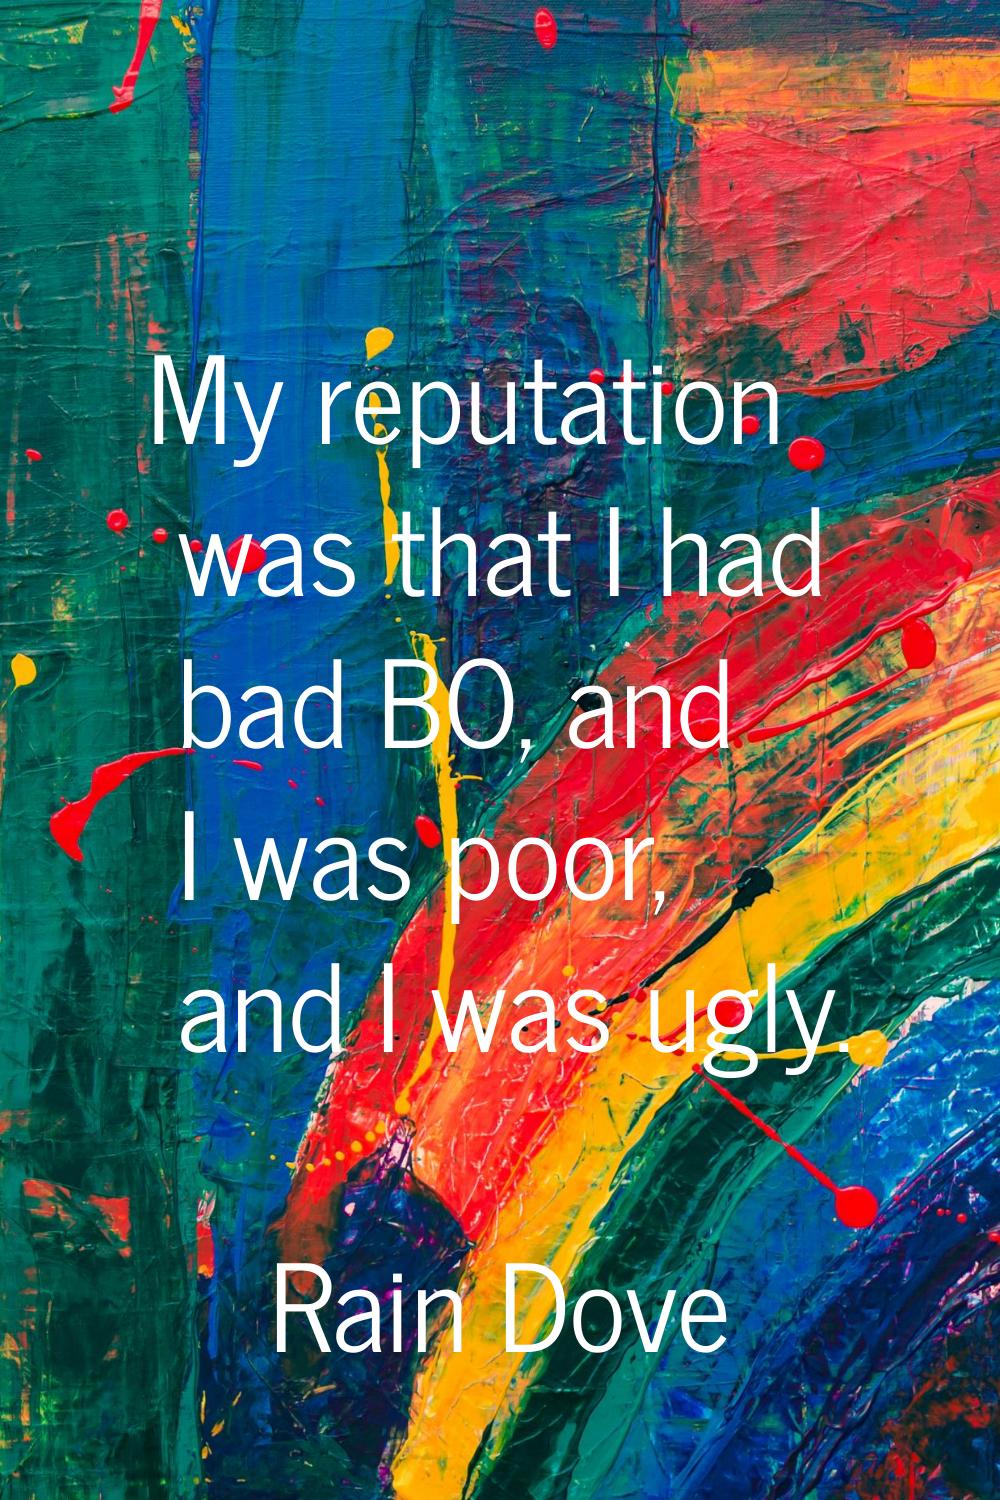 My reputation was that I had bad BO, and I was poor, and I was ugly.